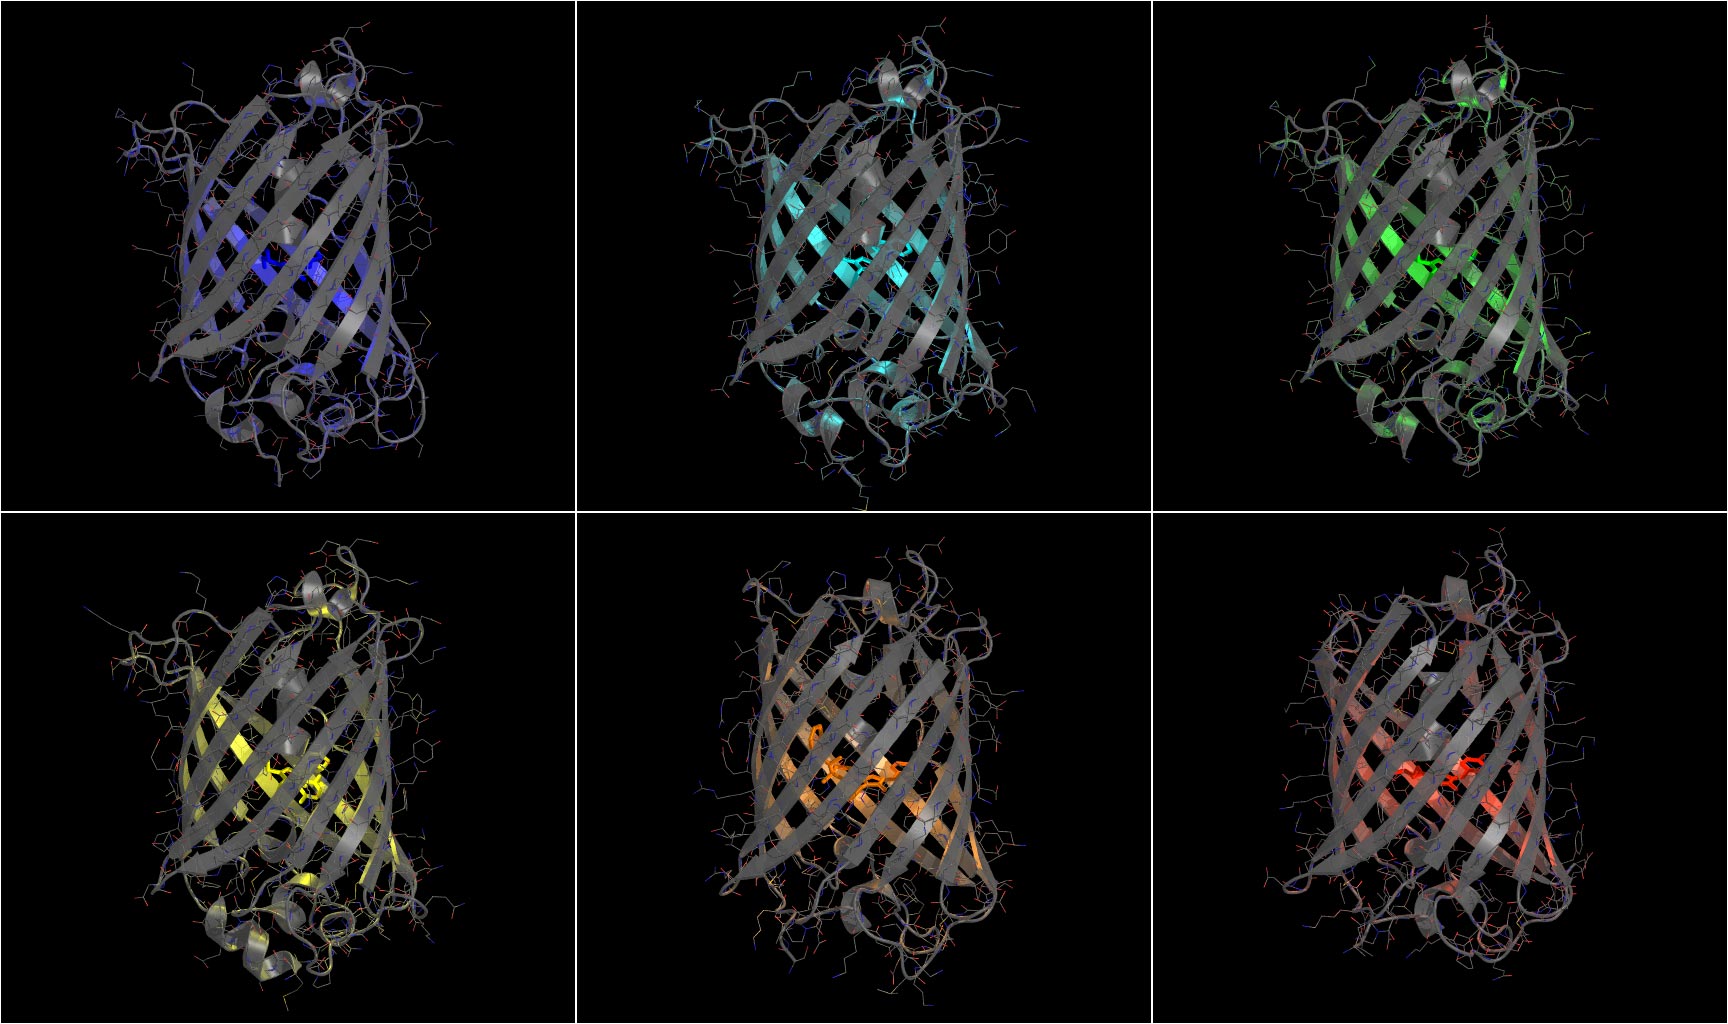 crystal structures of fluorescent proteins